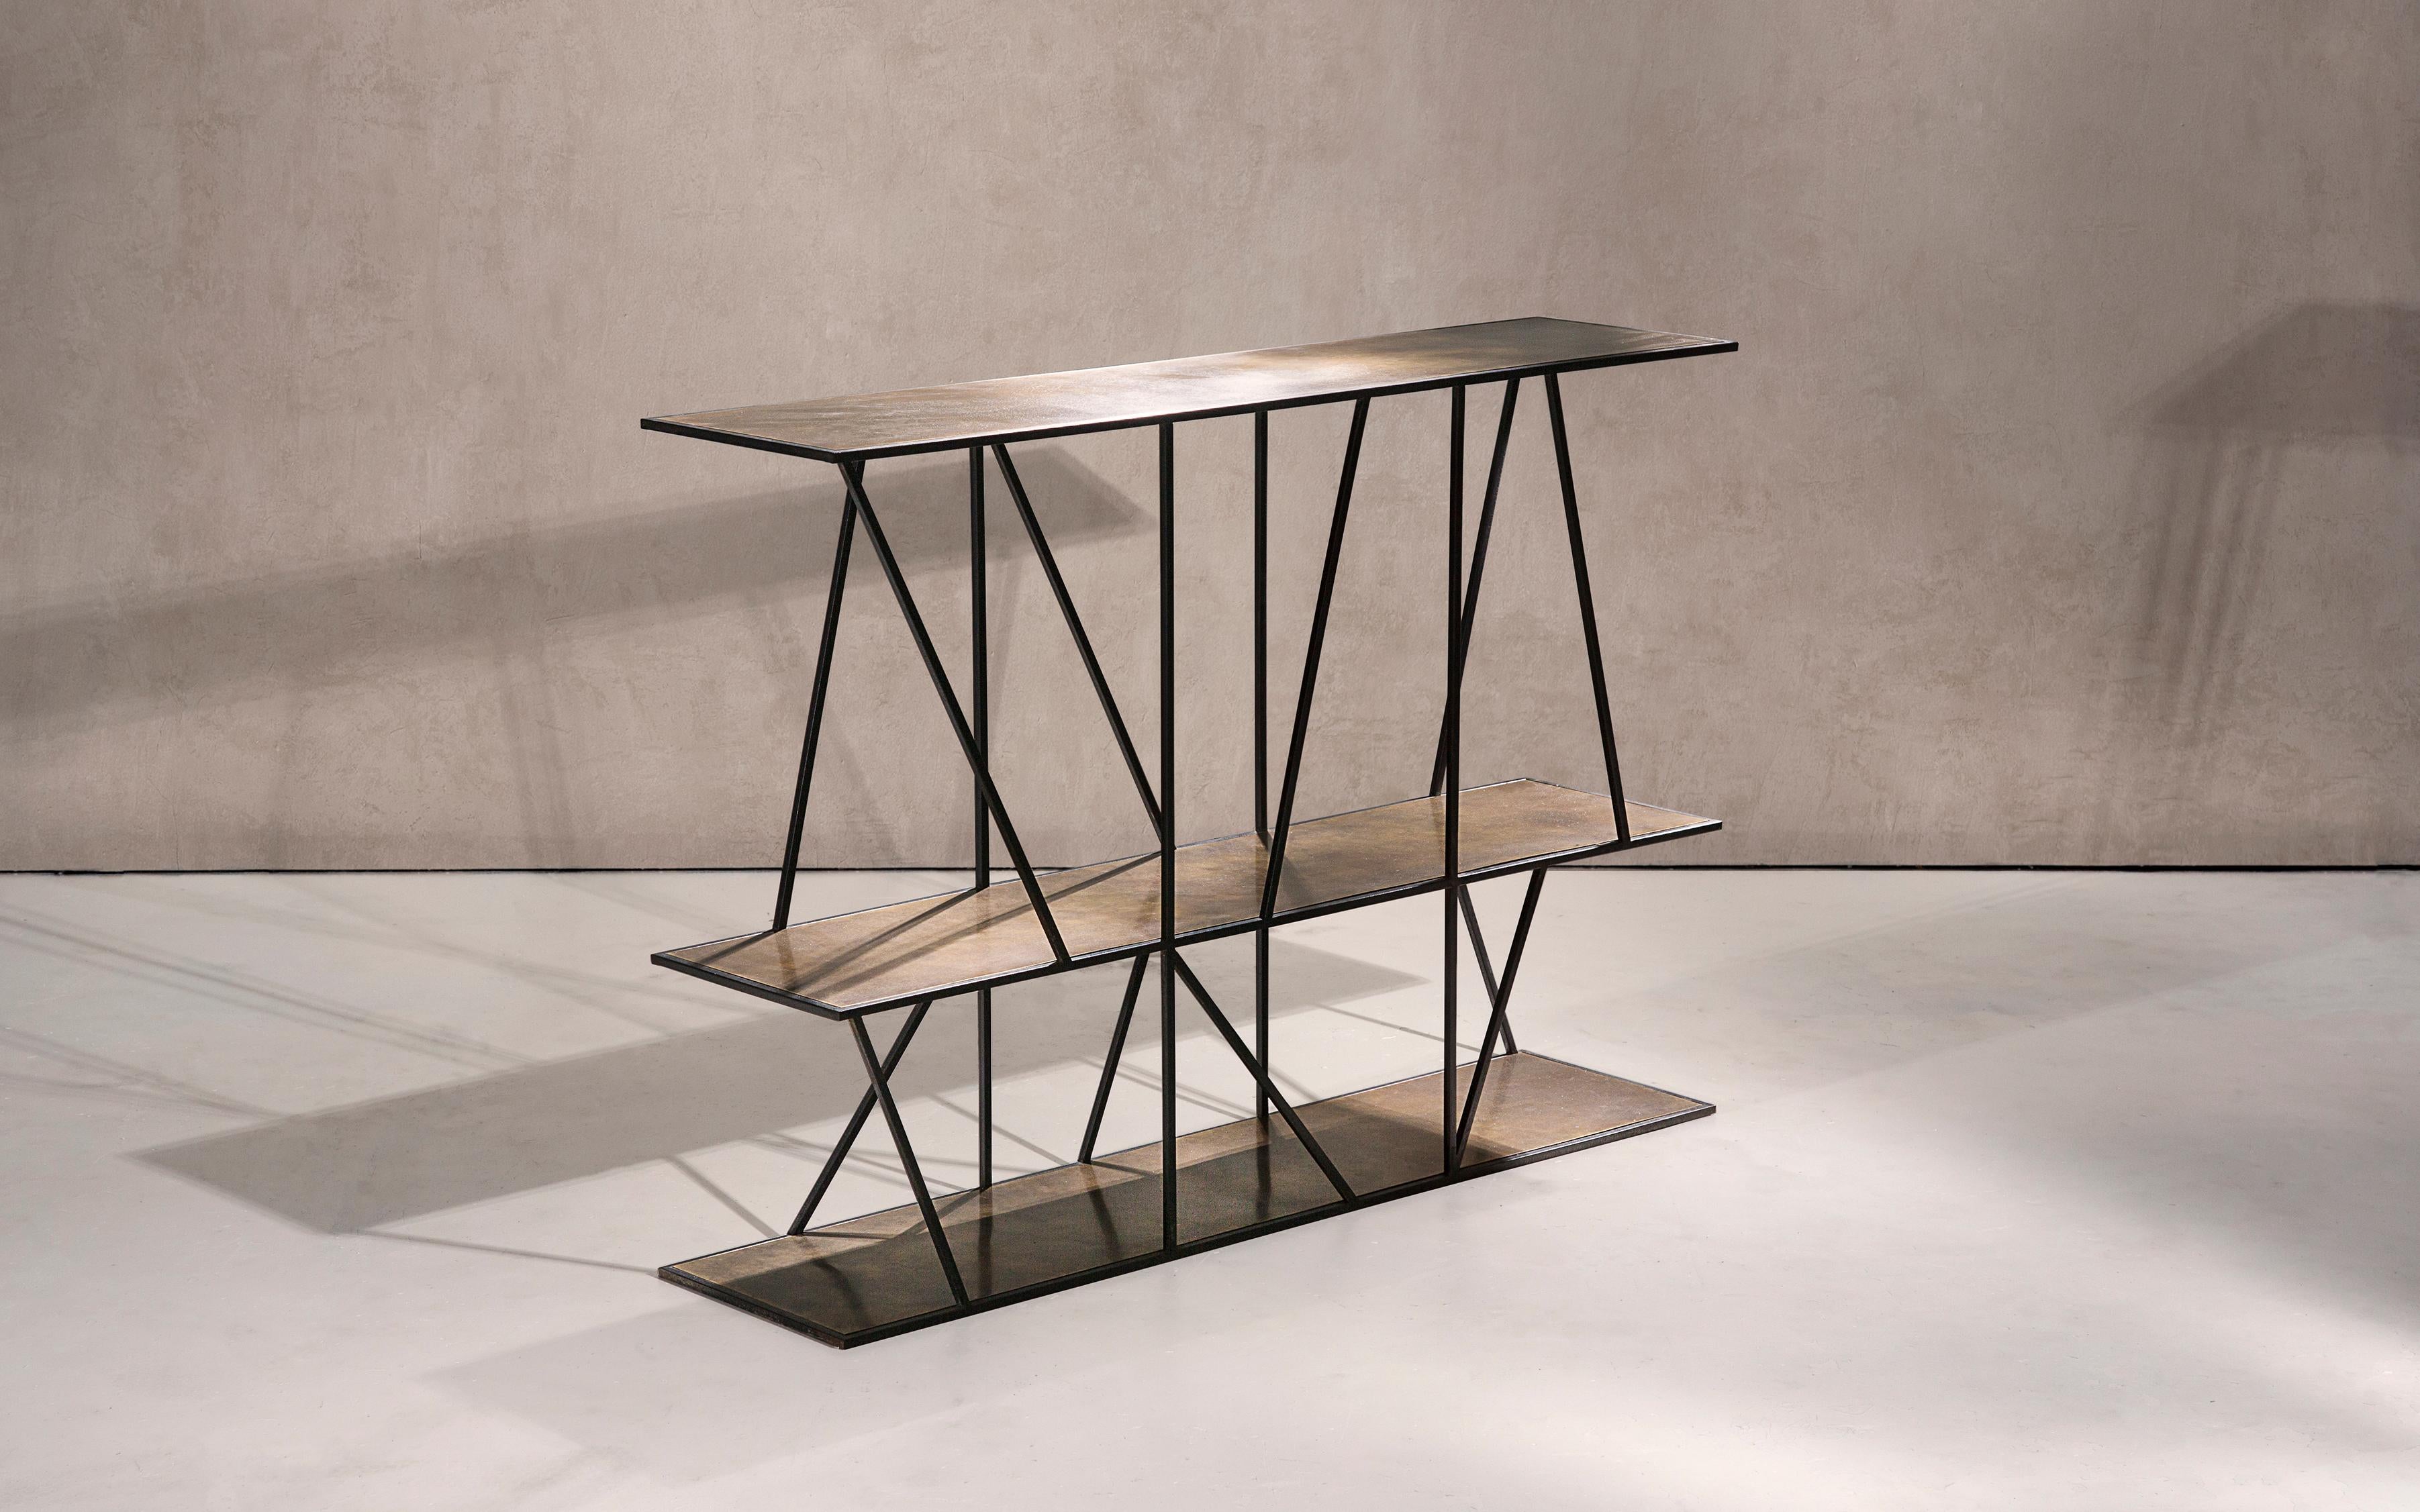 Medium Staiths Handcrafted console signed by Novocastrian
Materials: Patinated Brass
Dimensions: 150L x 30W x 80H
Custom sizes and finishes are available.

A sculptural console table in black patinated steel and patinated brass. Handcrafted in